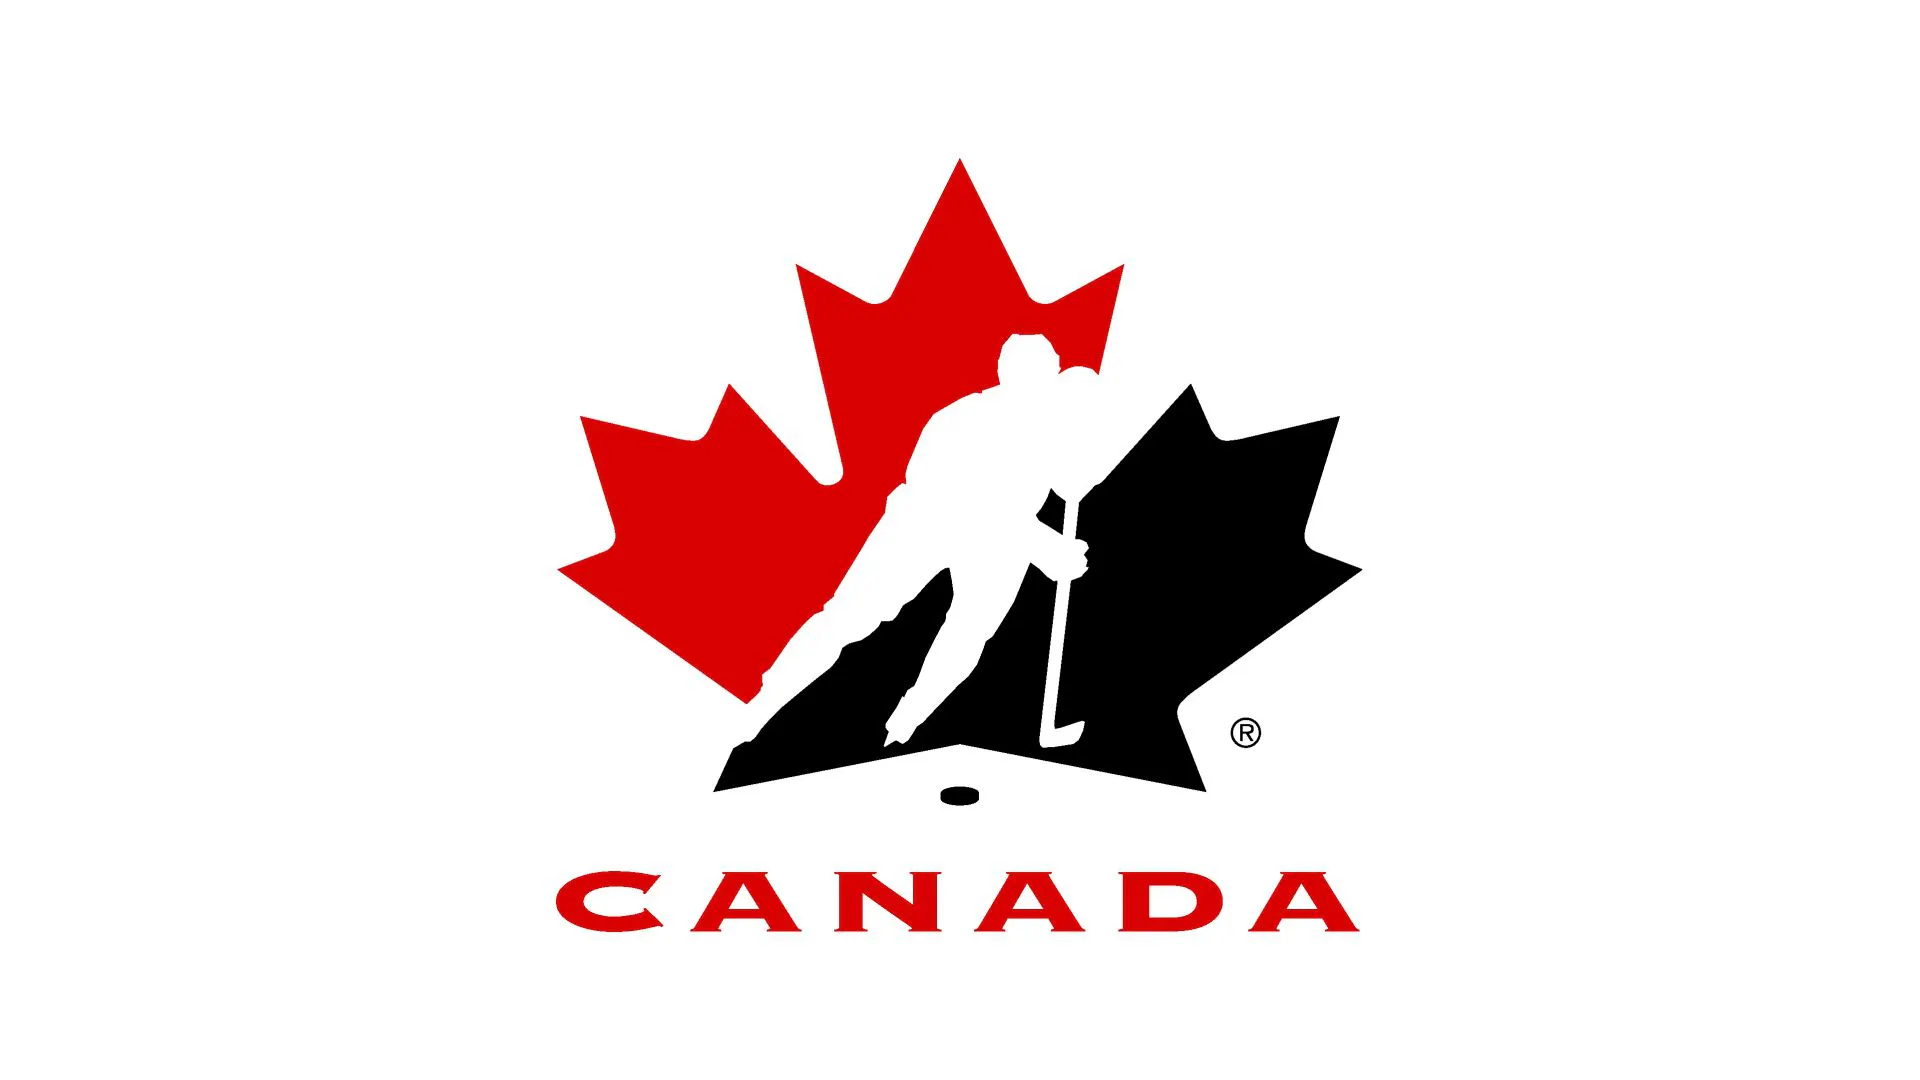 Scotiabank, Canadian Tire pausing sponsorships with Hockey Canada in wake of settled lawsuit